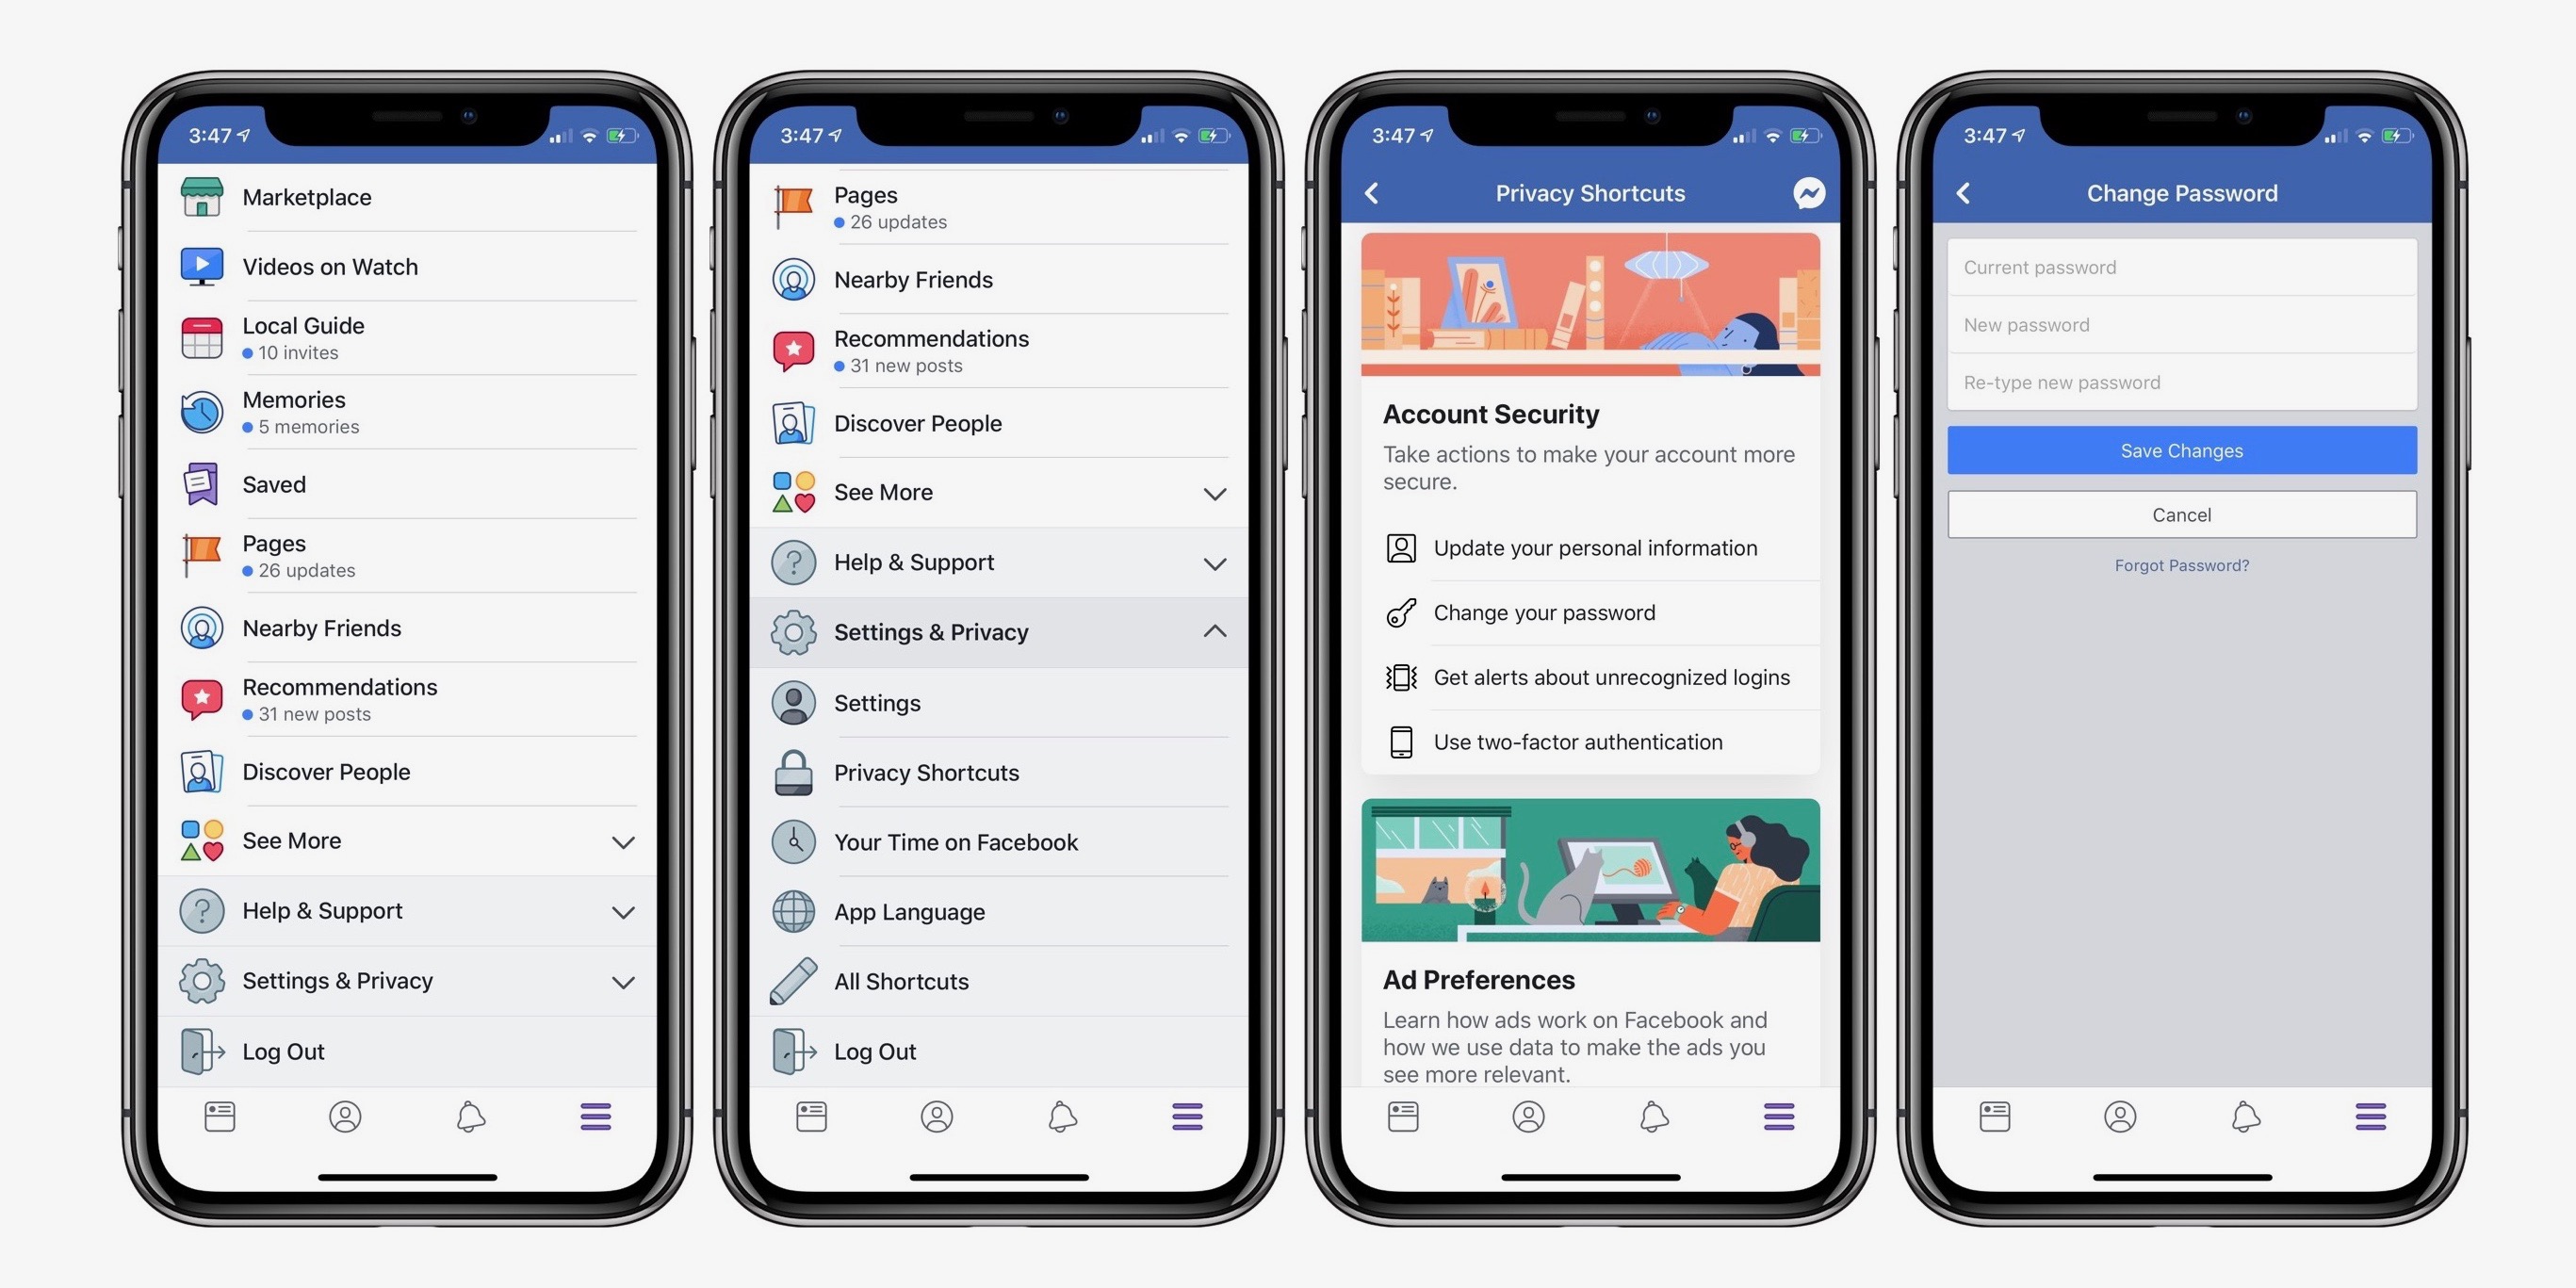 What You Need to Know About Facebook's New Mobile Logins